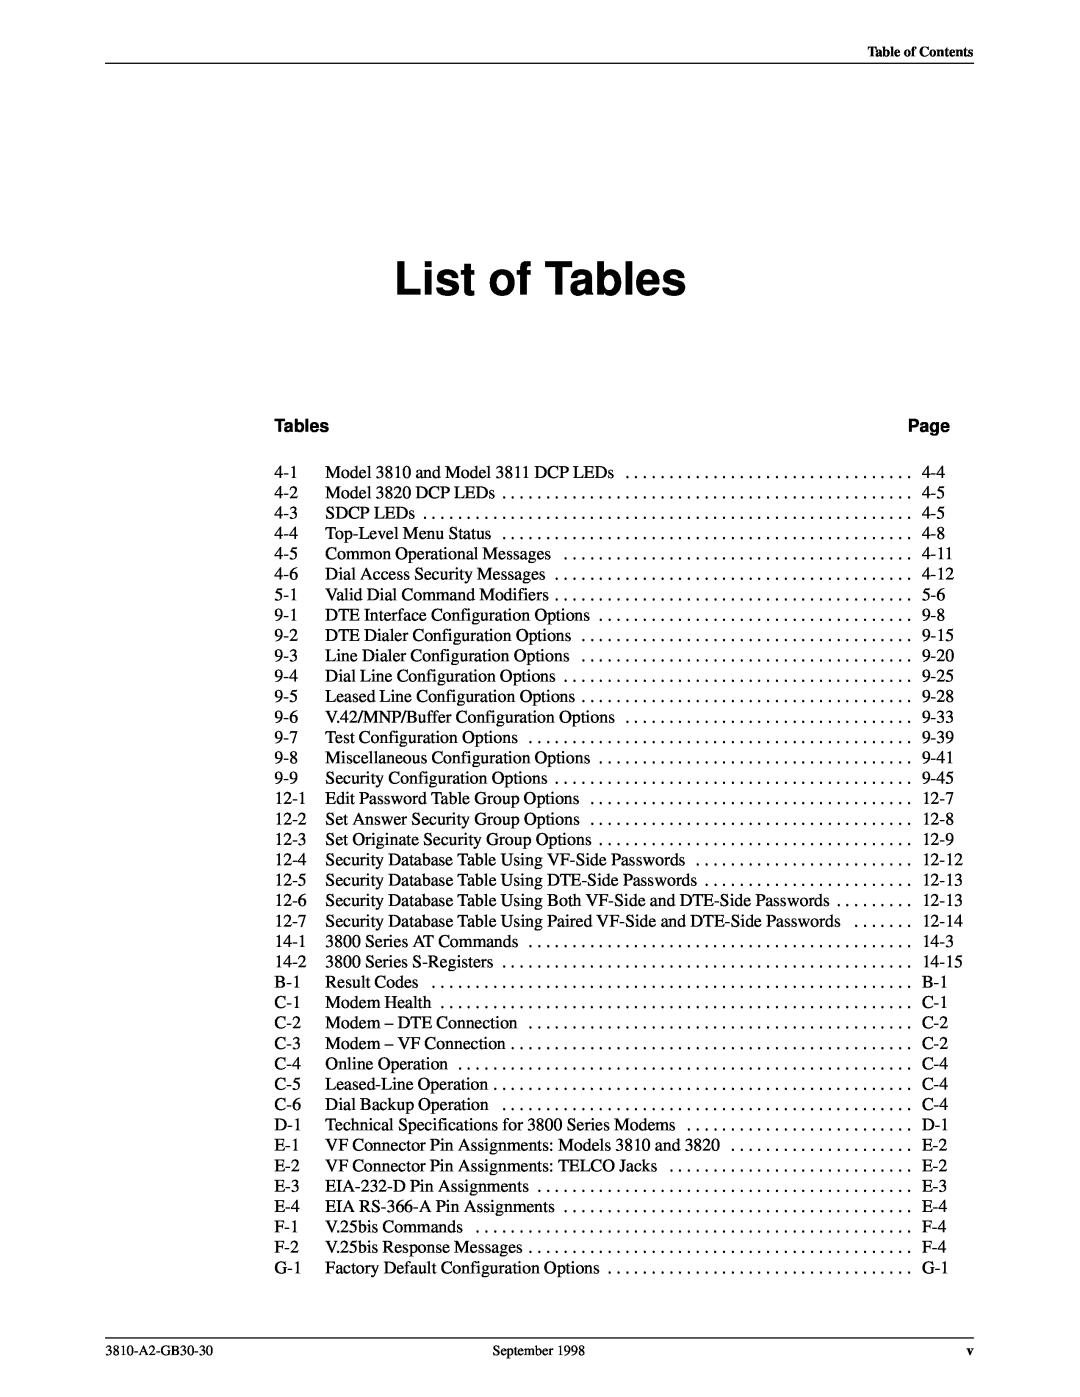 Paradyne 3800 manual List of Tables, Page 